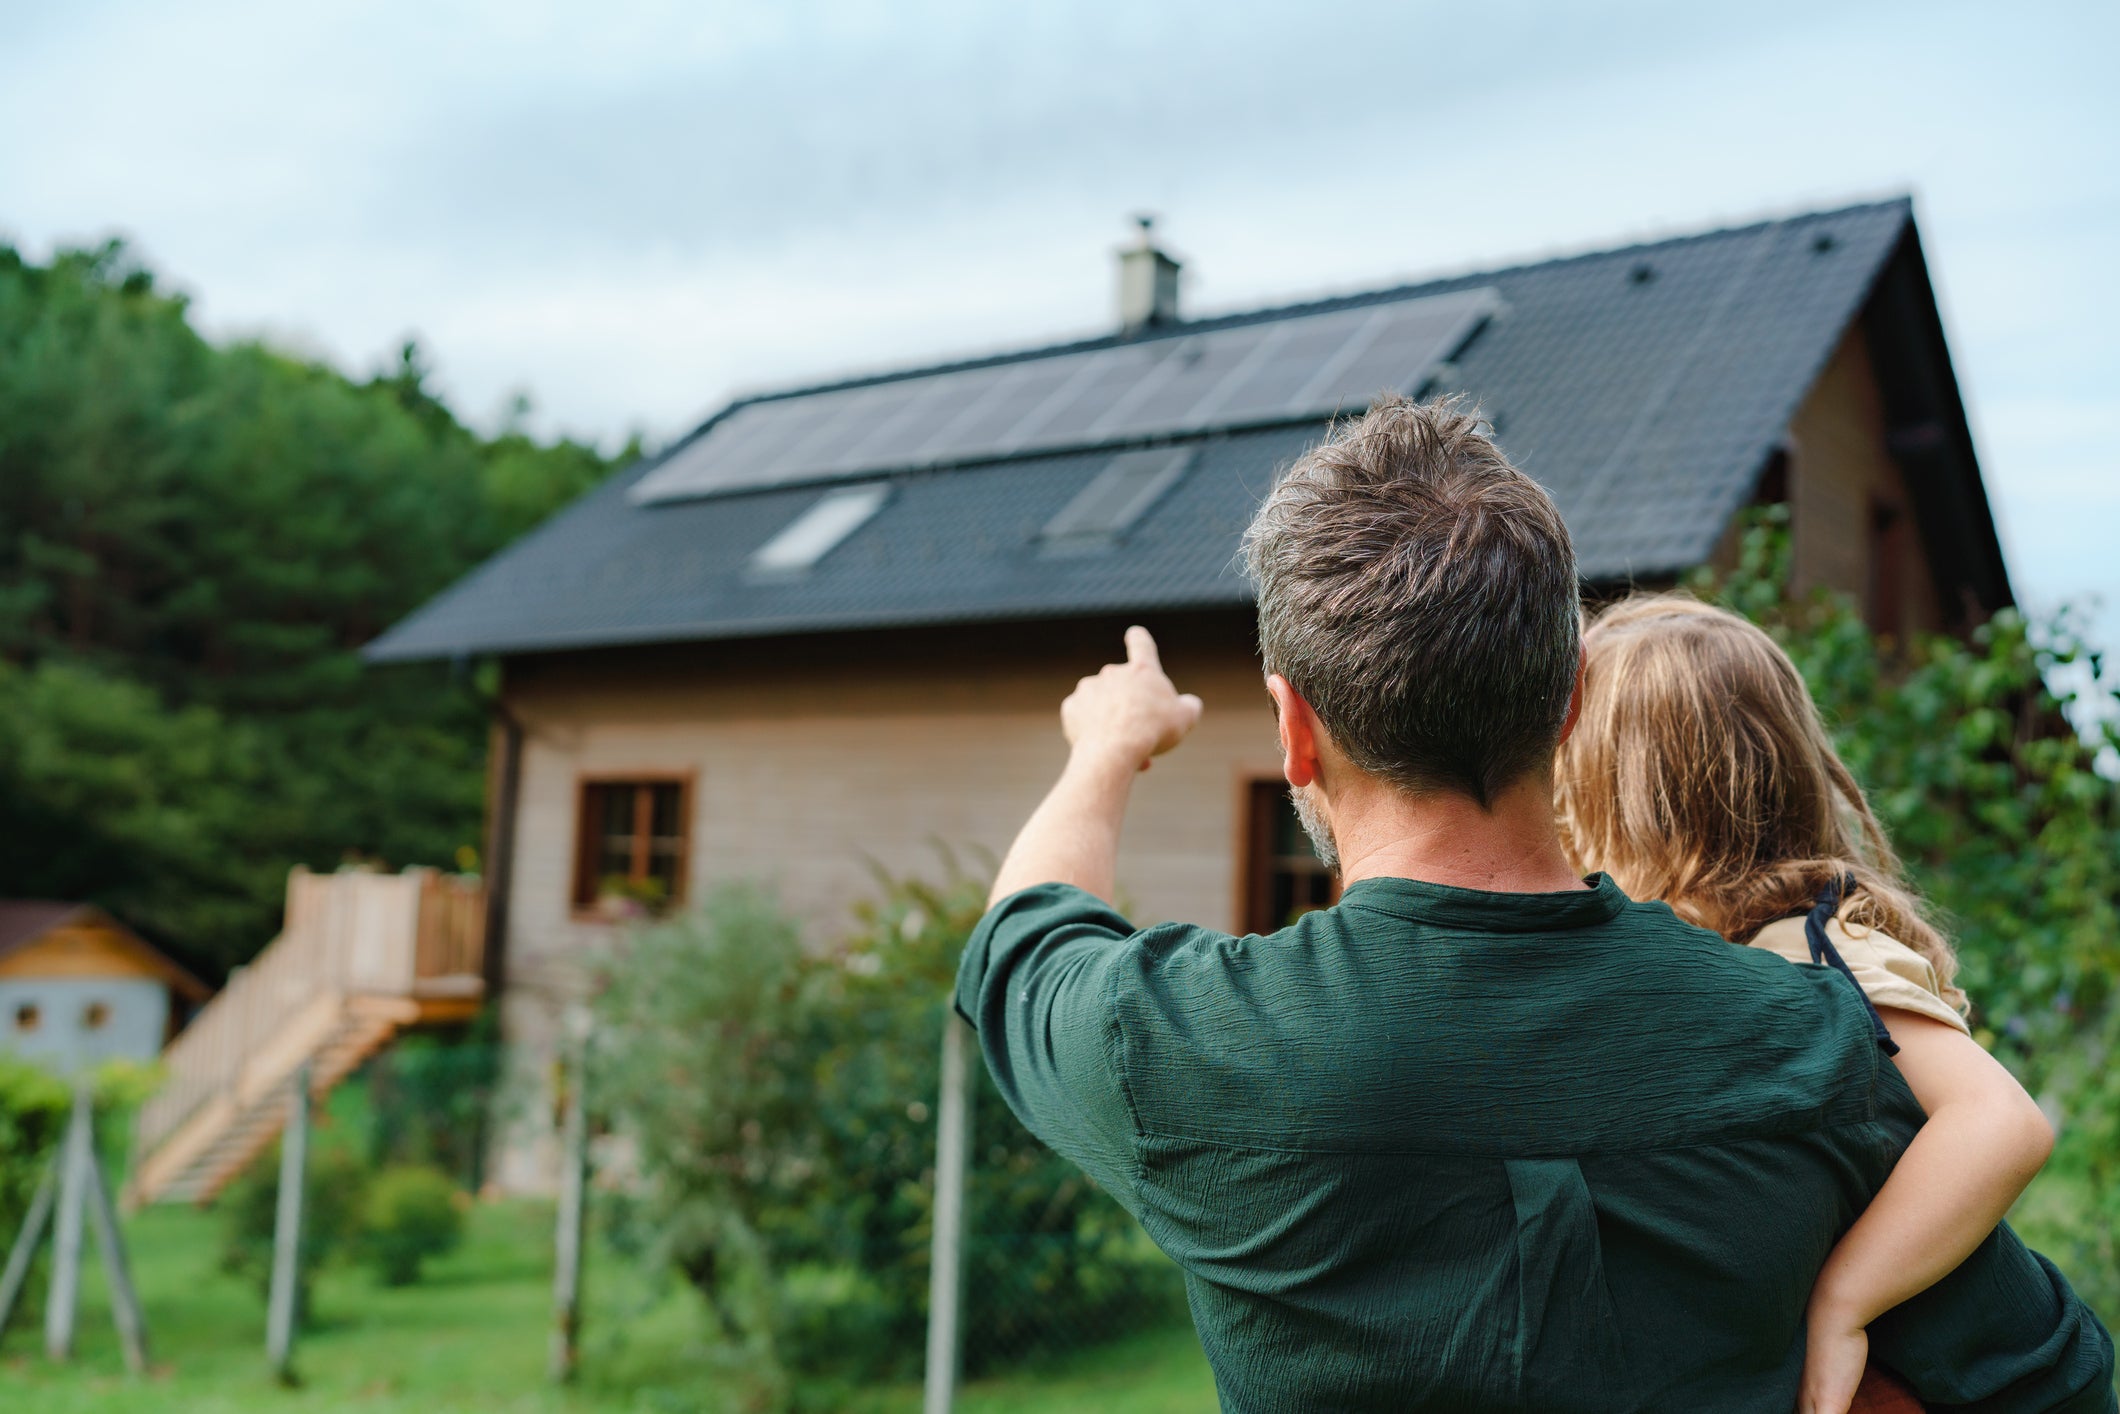 Father and child viewing a home with solar panels